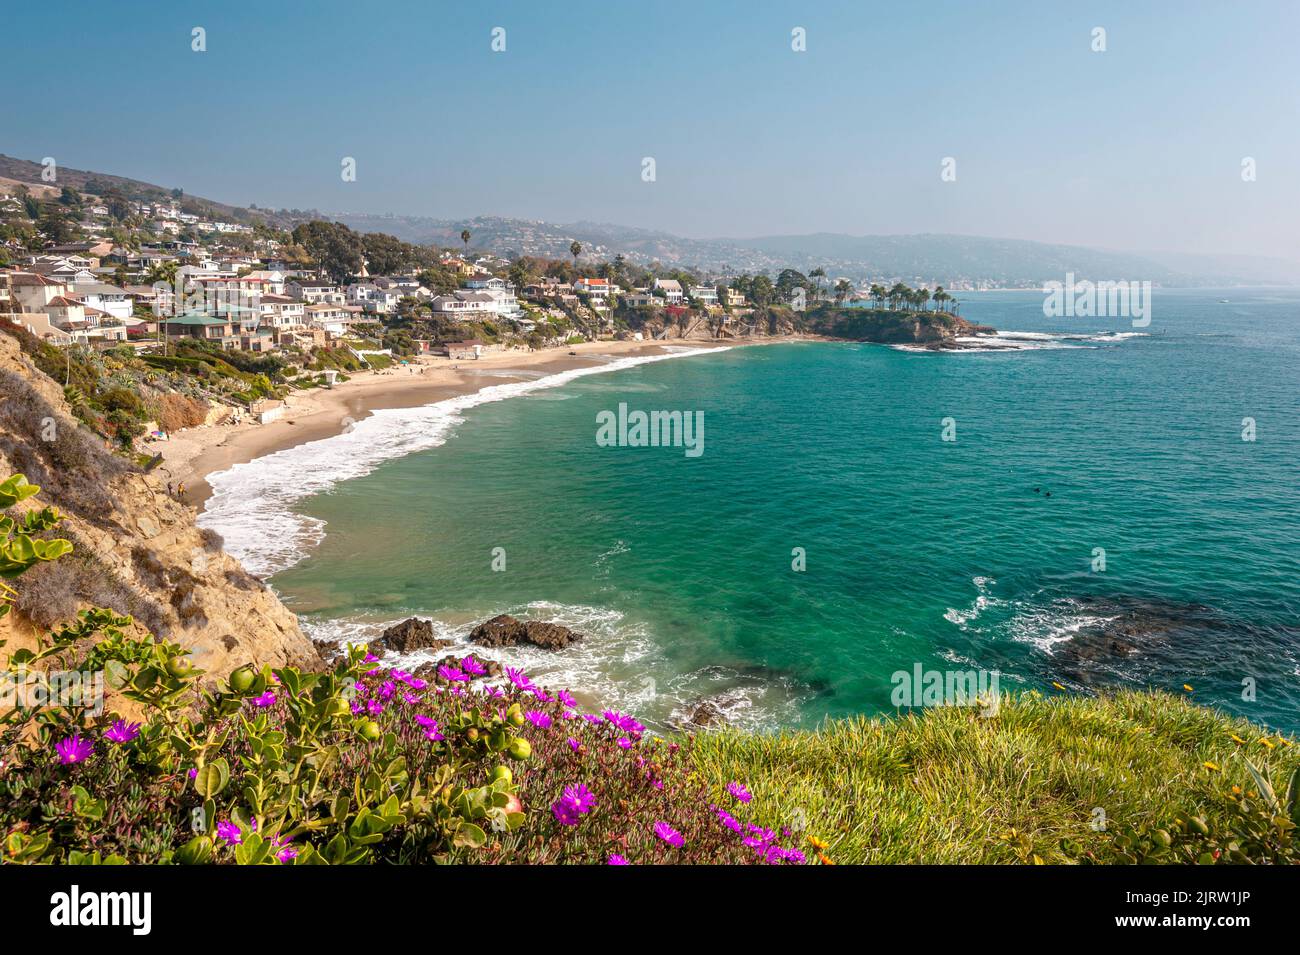 A view of Shaw's Cove in Laguna Beach as the morning marine layer burns off and lights the cove. Stock Photo